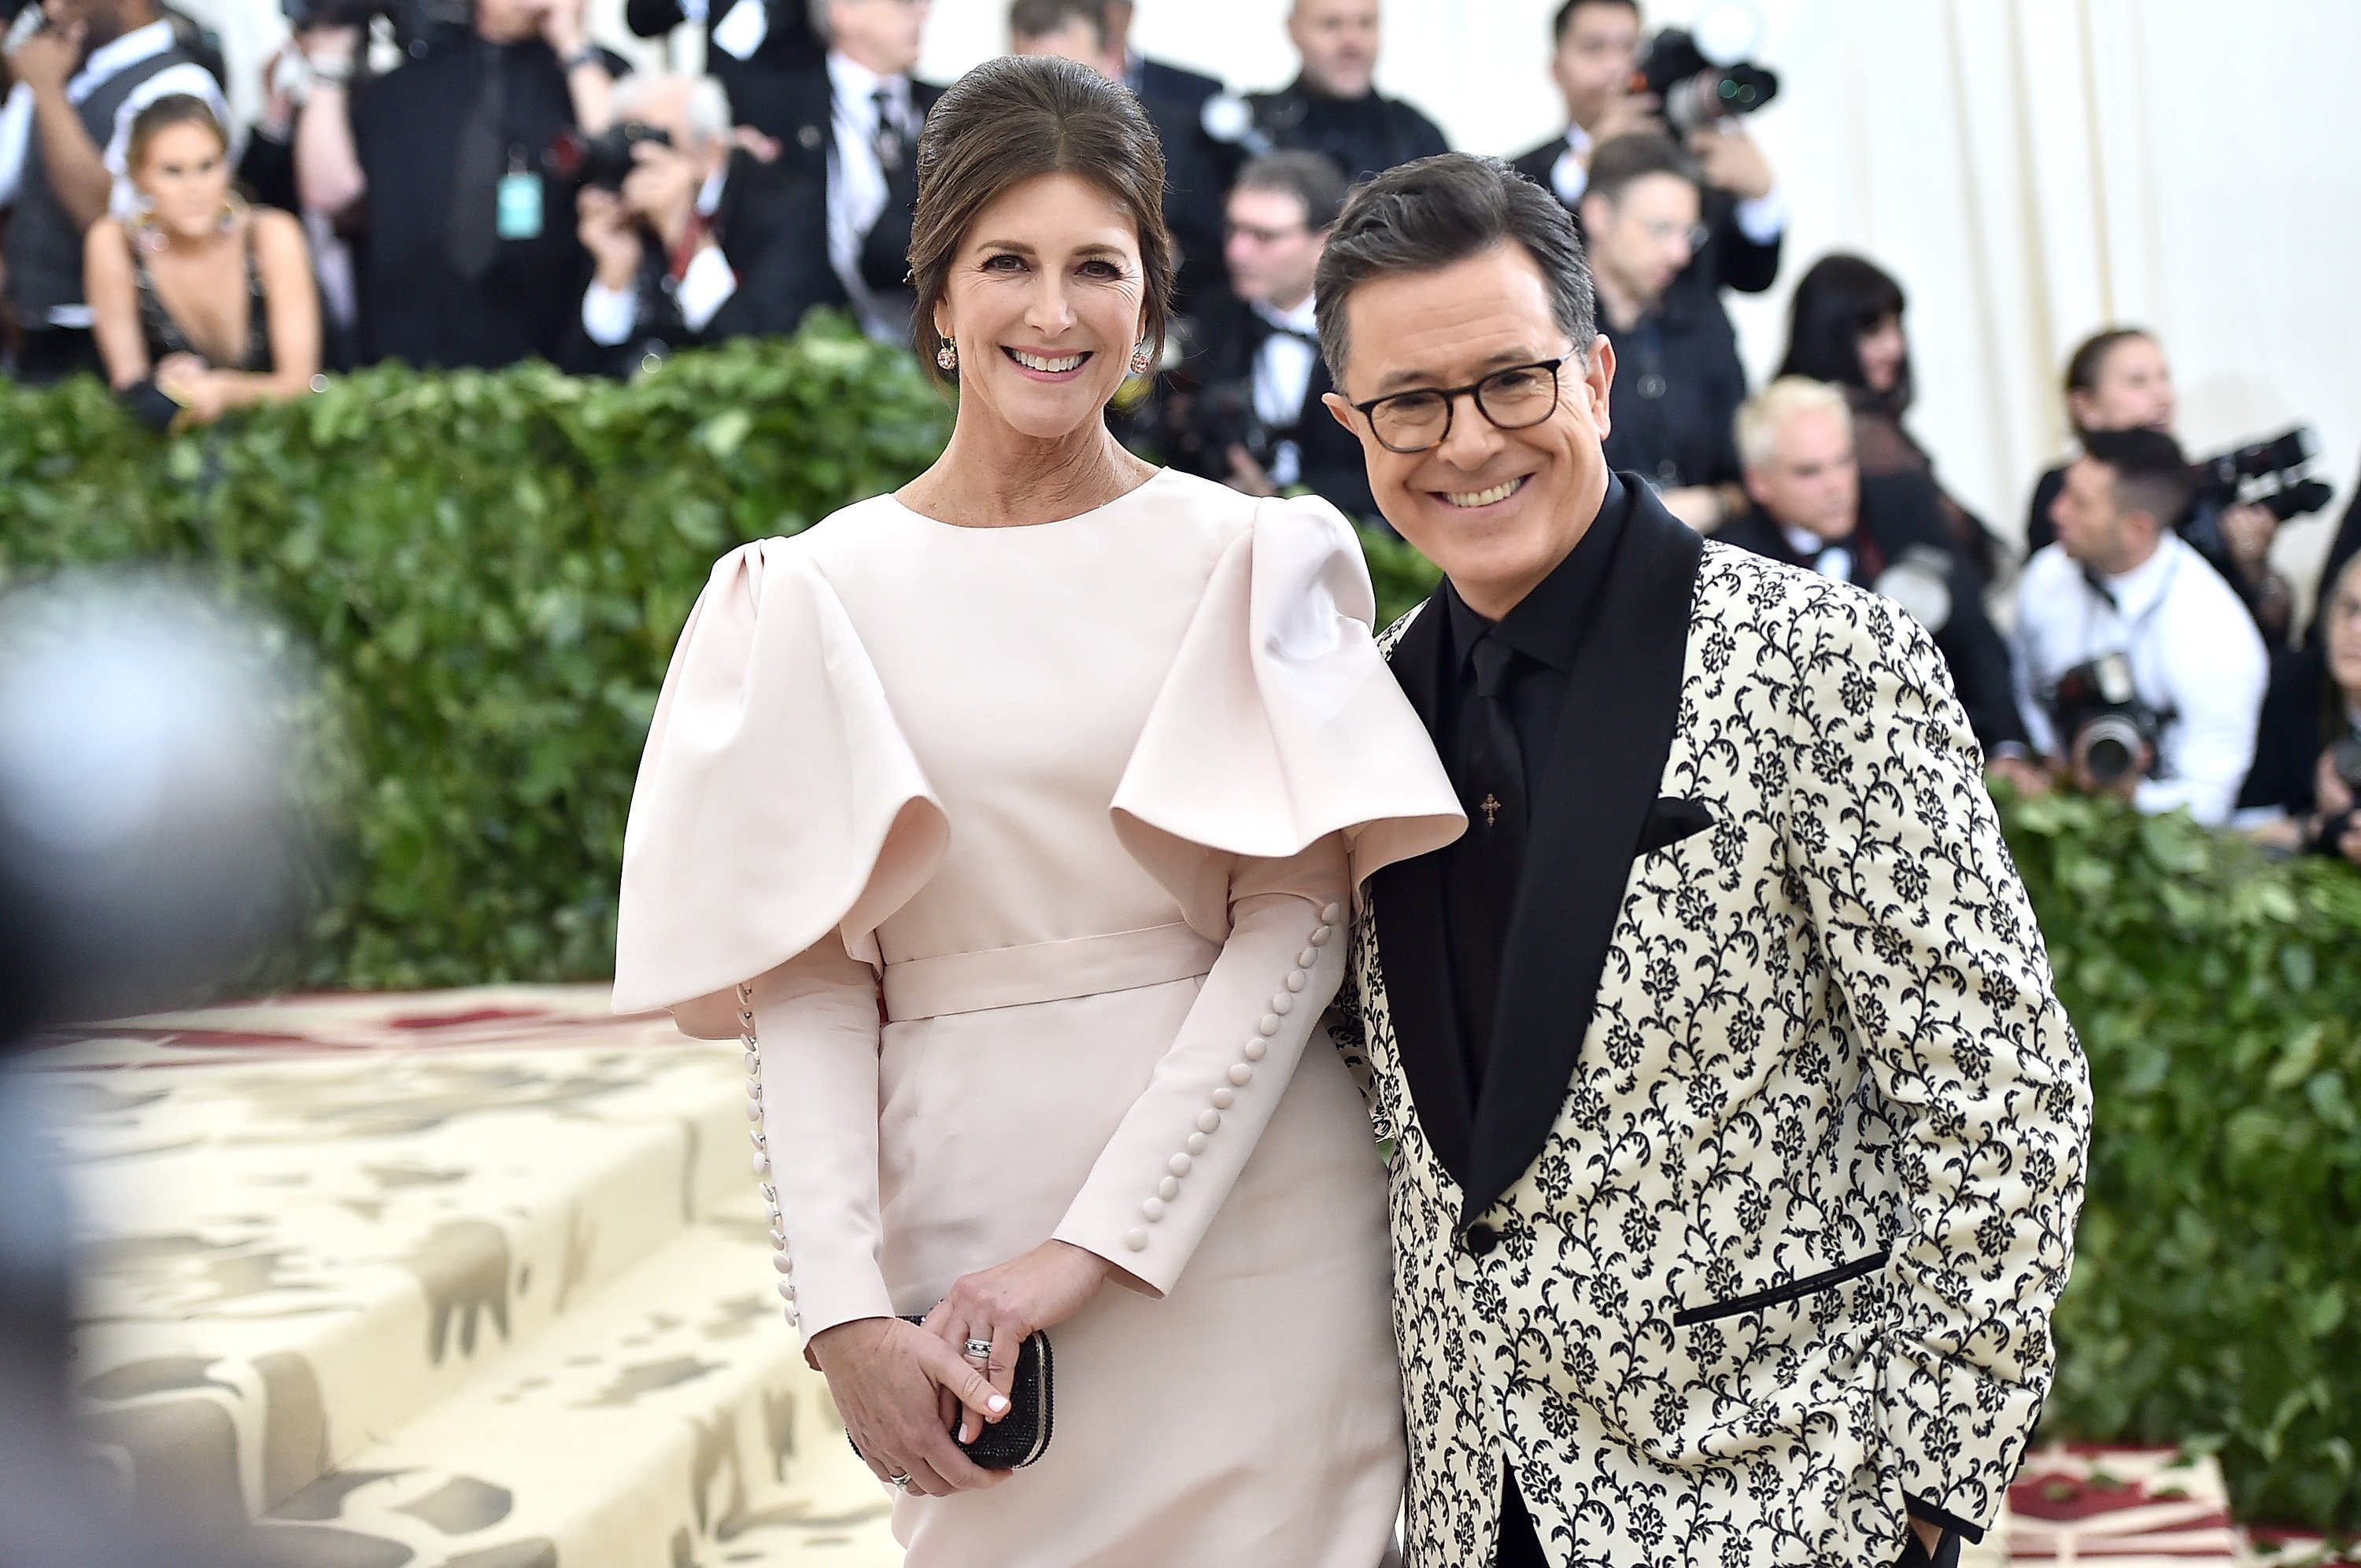 Stephen Colbert and Evelyn McGee-Colbert at the 2018 Met Gala on May 7, 2018 |  Source: Getty Images